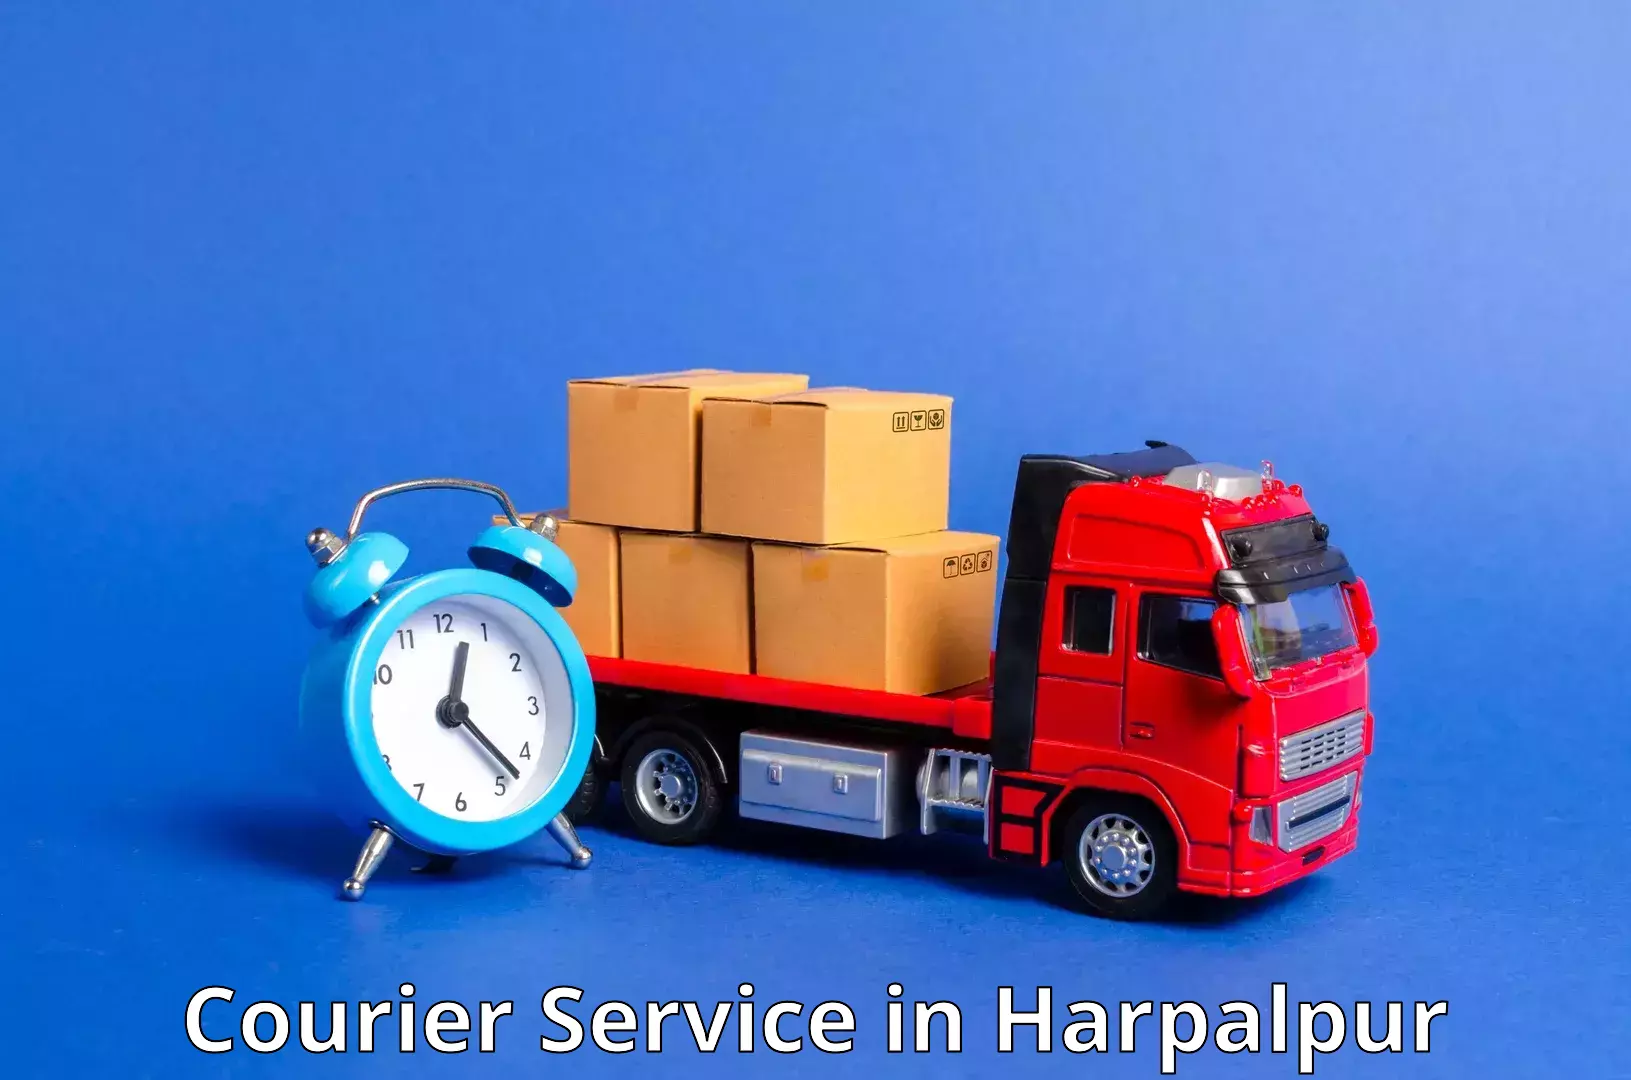 Postal and courier services in Harpalpur